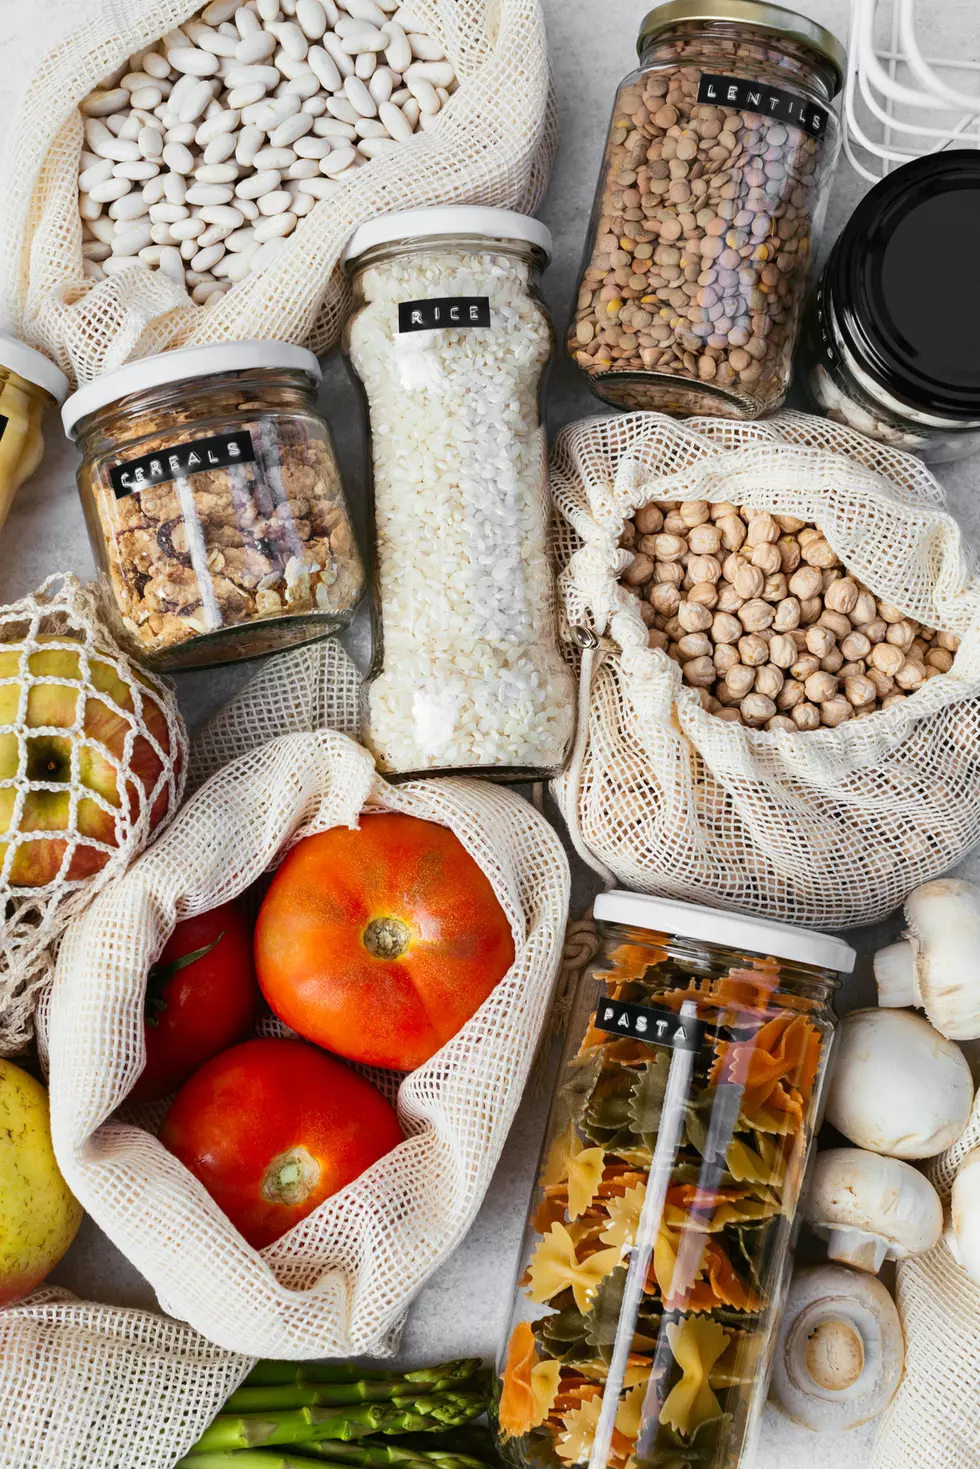 Value-priced plant-based pantry essentials